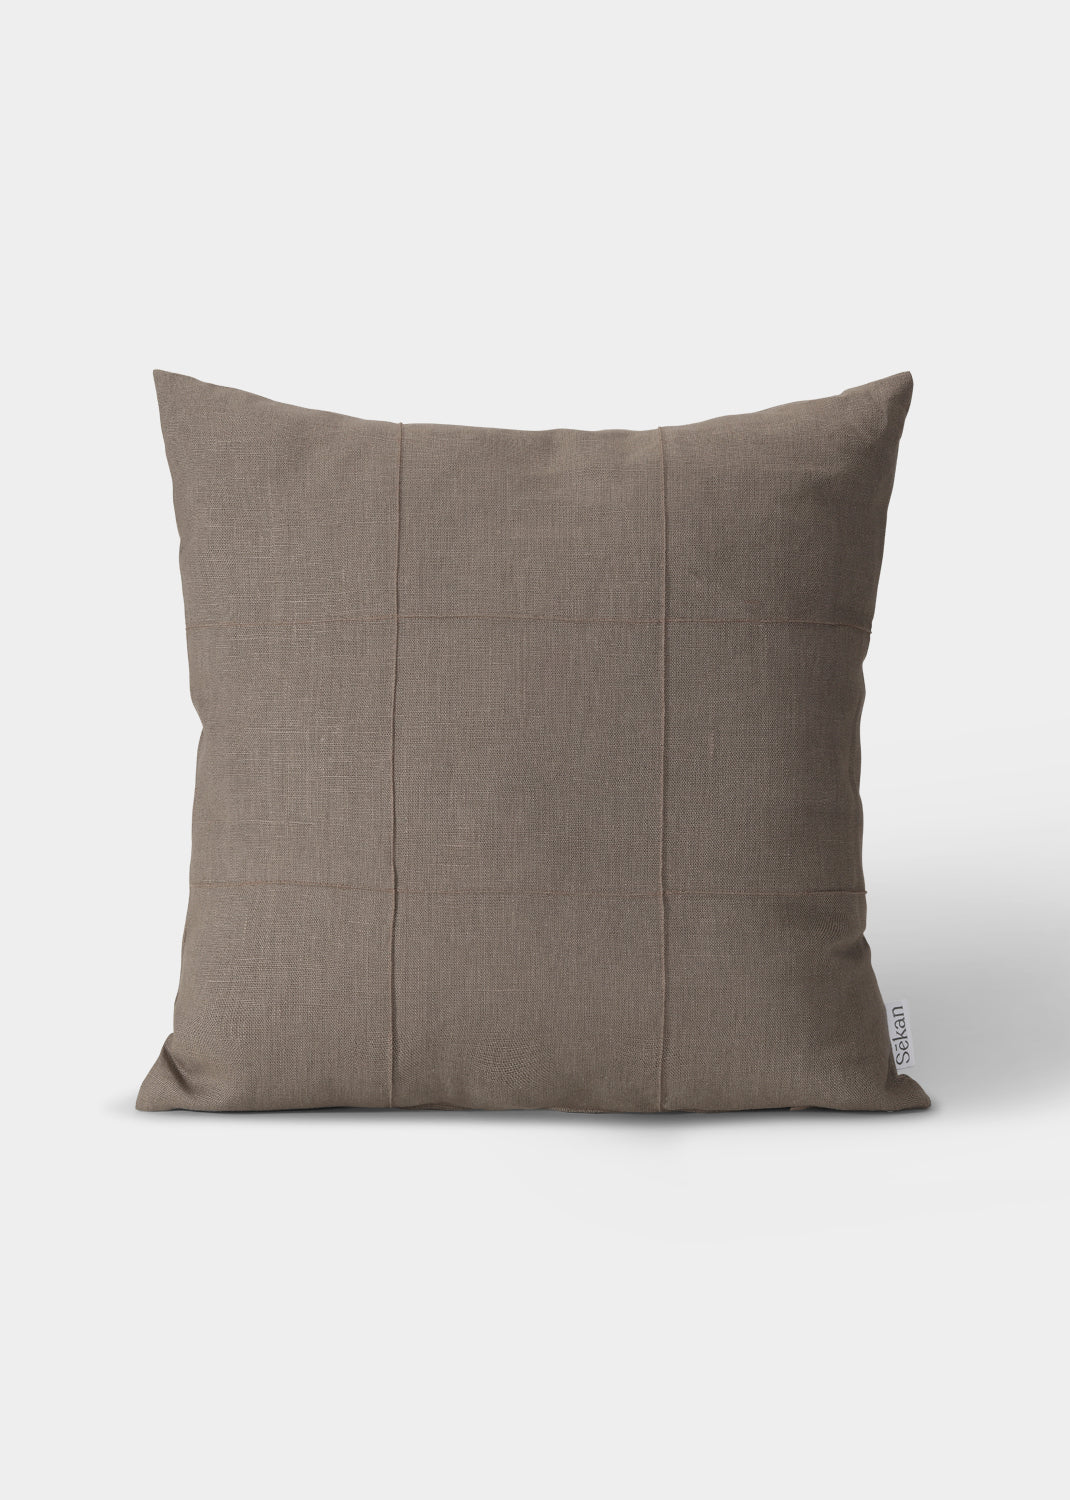 Flax pillow - Taupe 